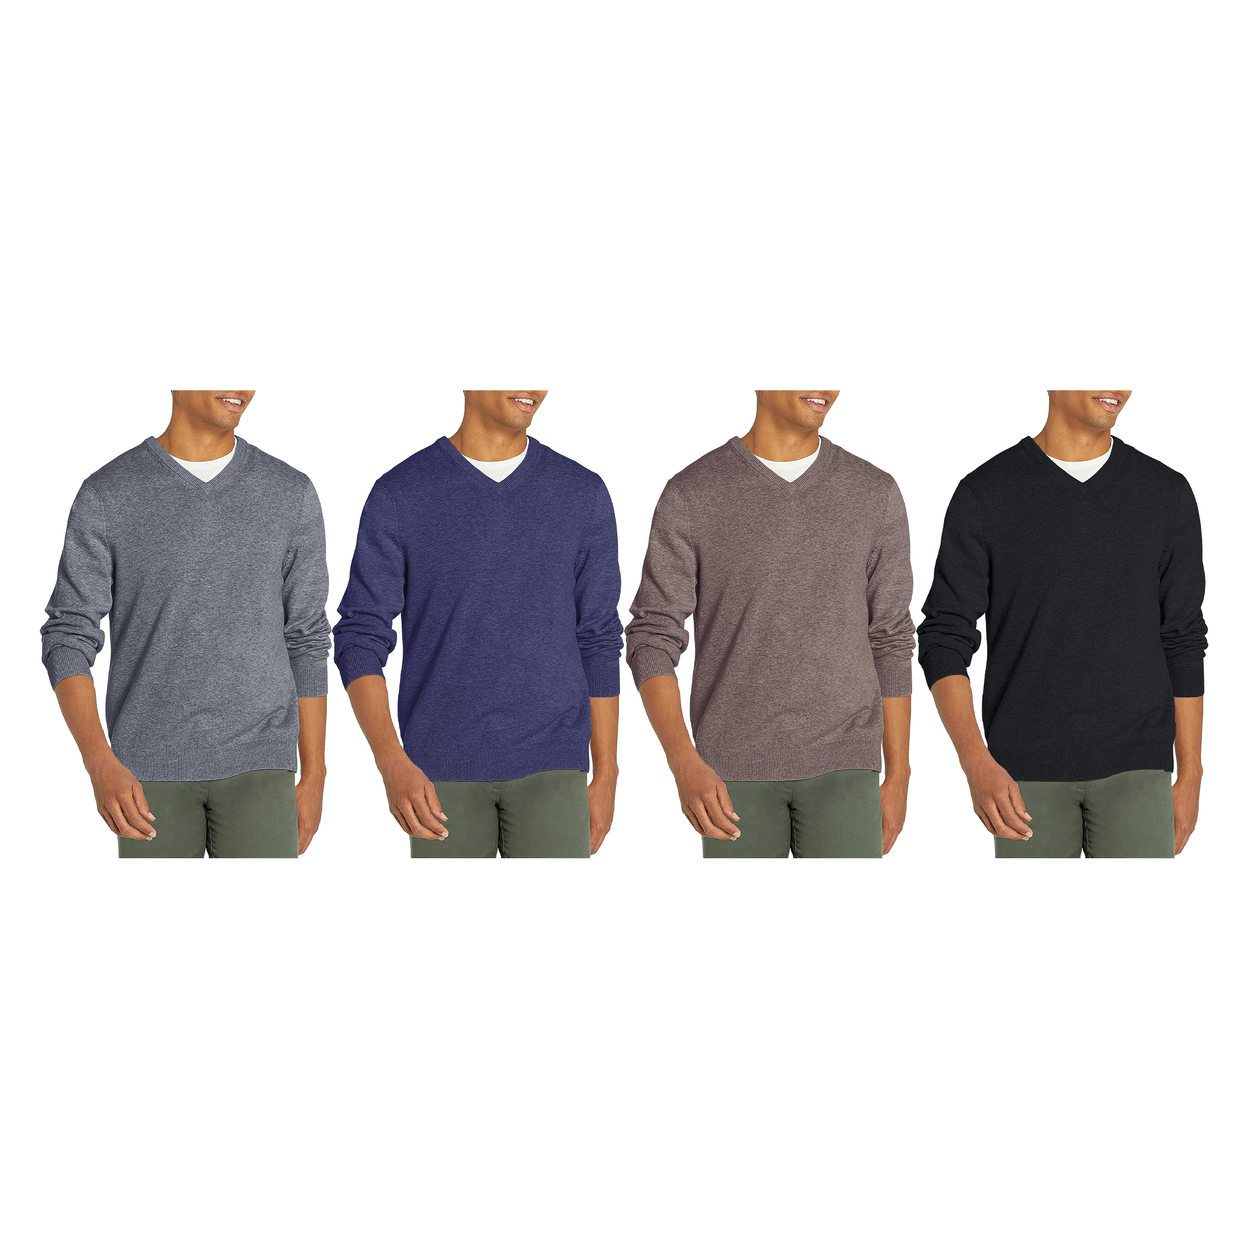 Men's Casual Ultra-Soft Slim Fit Warm Knit V-Neck Sweater - Grey, X-large